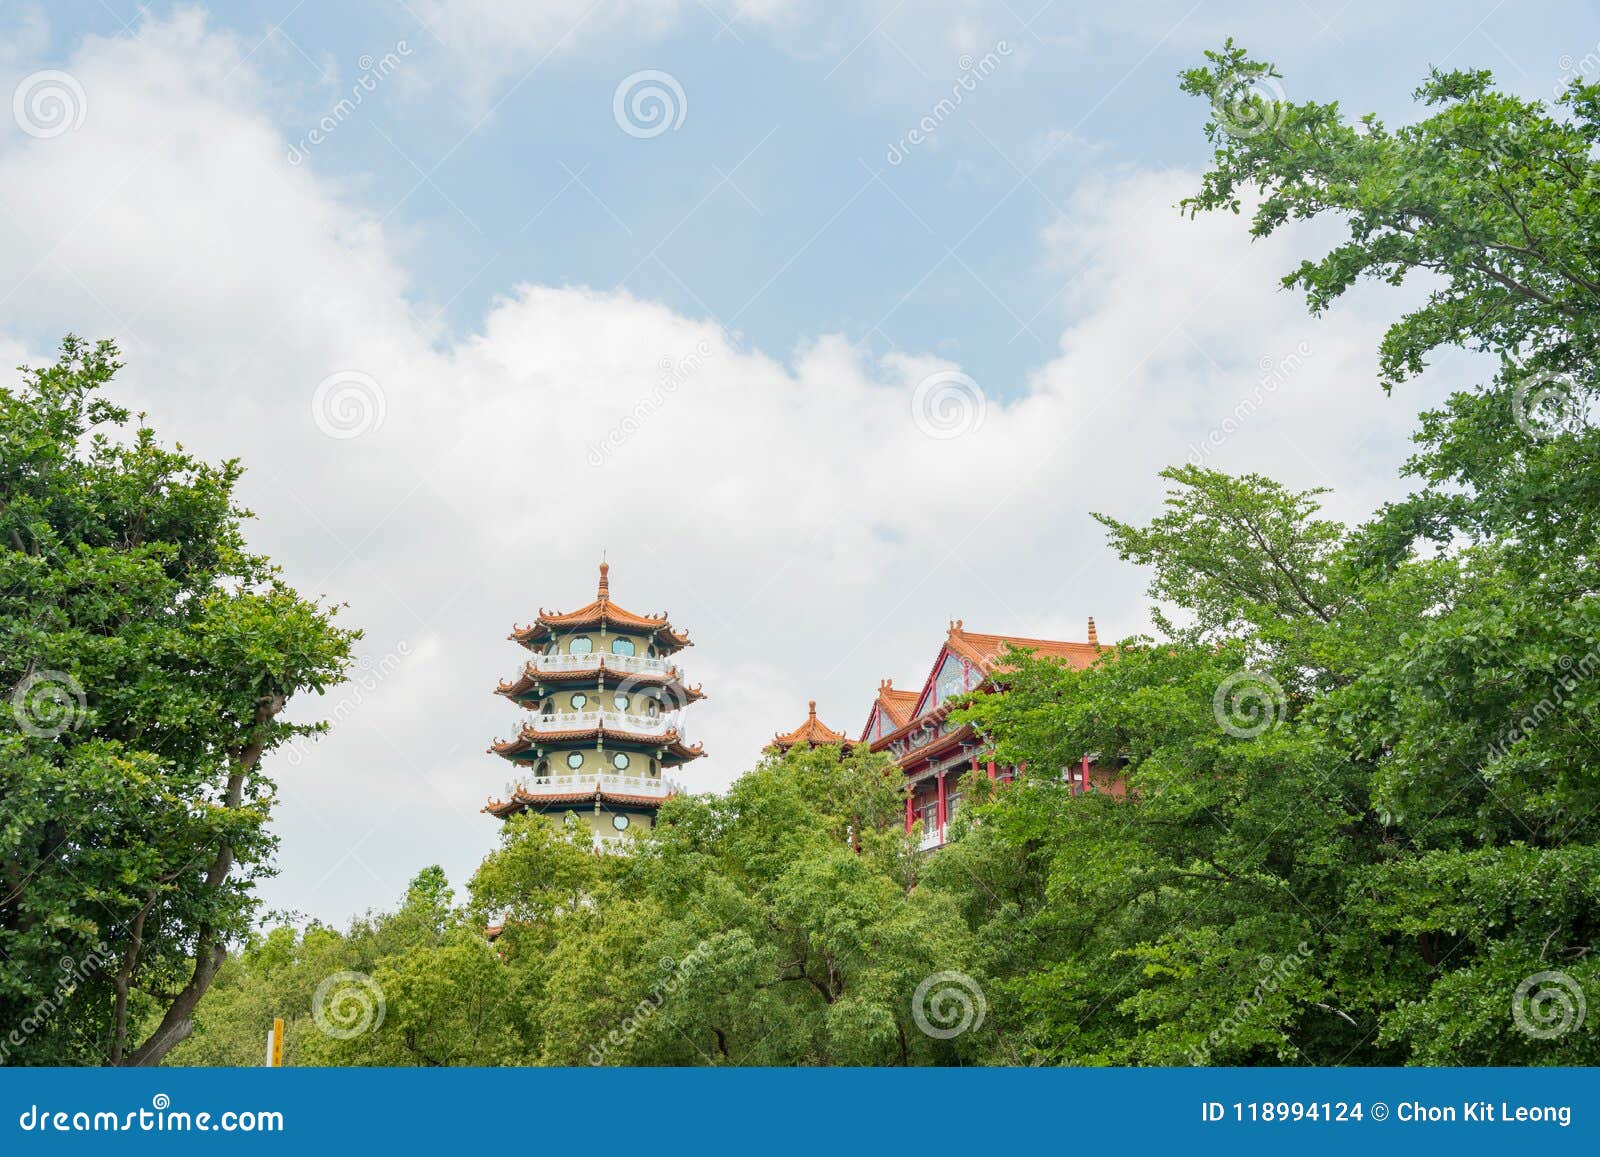 some building of eight trigram mountains buddha landscape